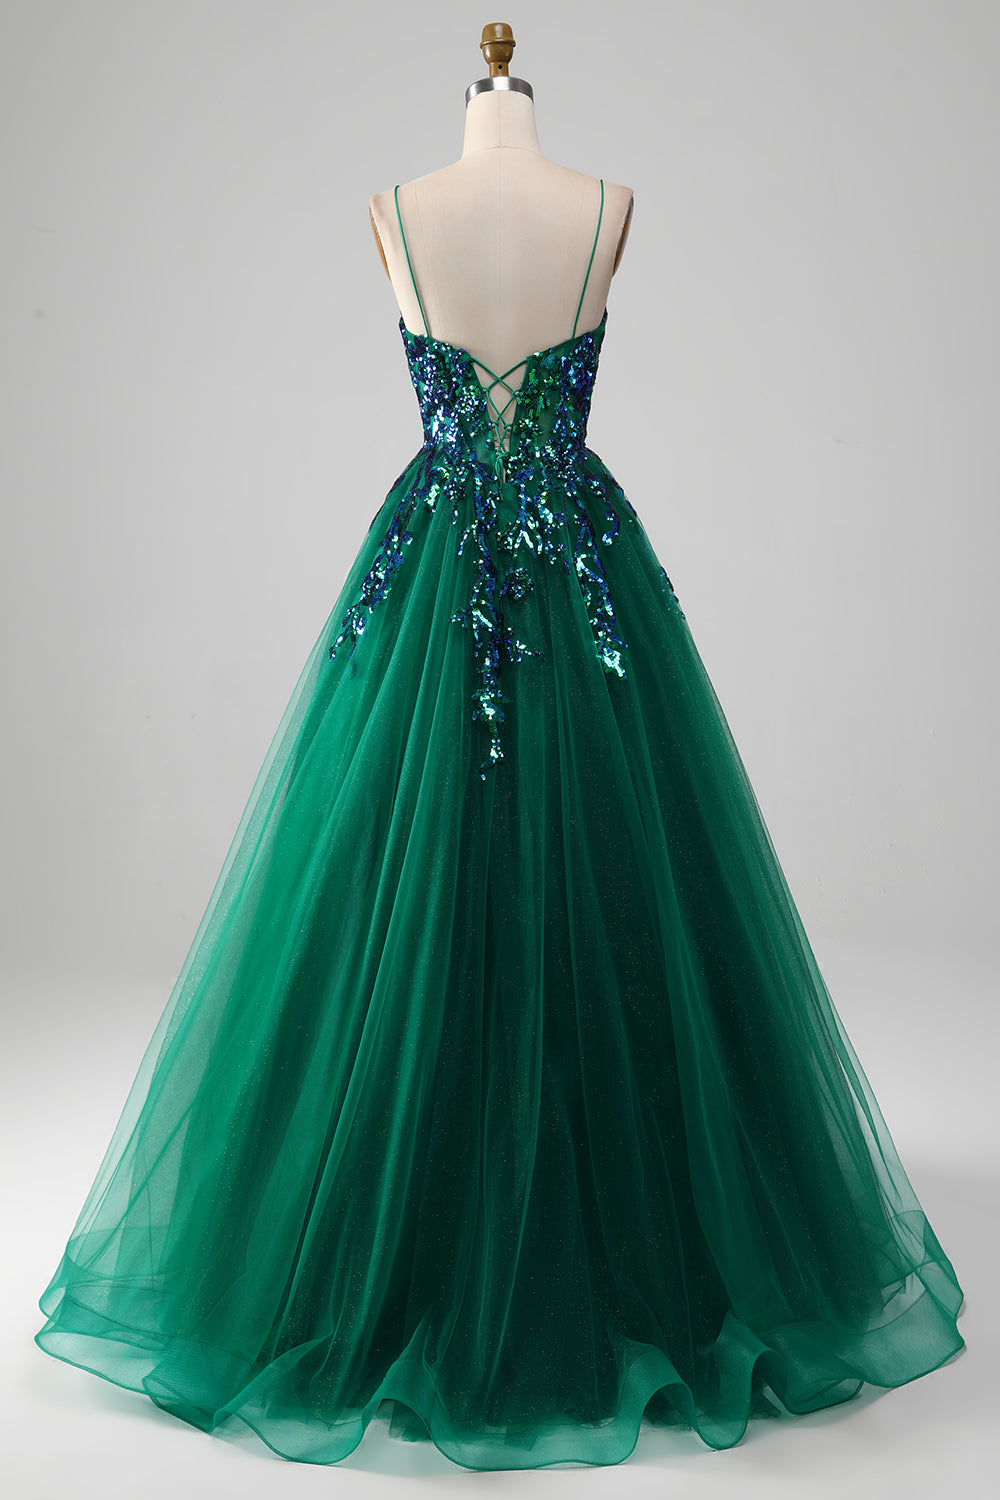 Prom Dresses 2022 Cheap, Tulle Spaghetti Straps Dark Green Prom Dress with Sequins